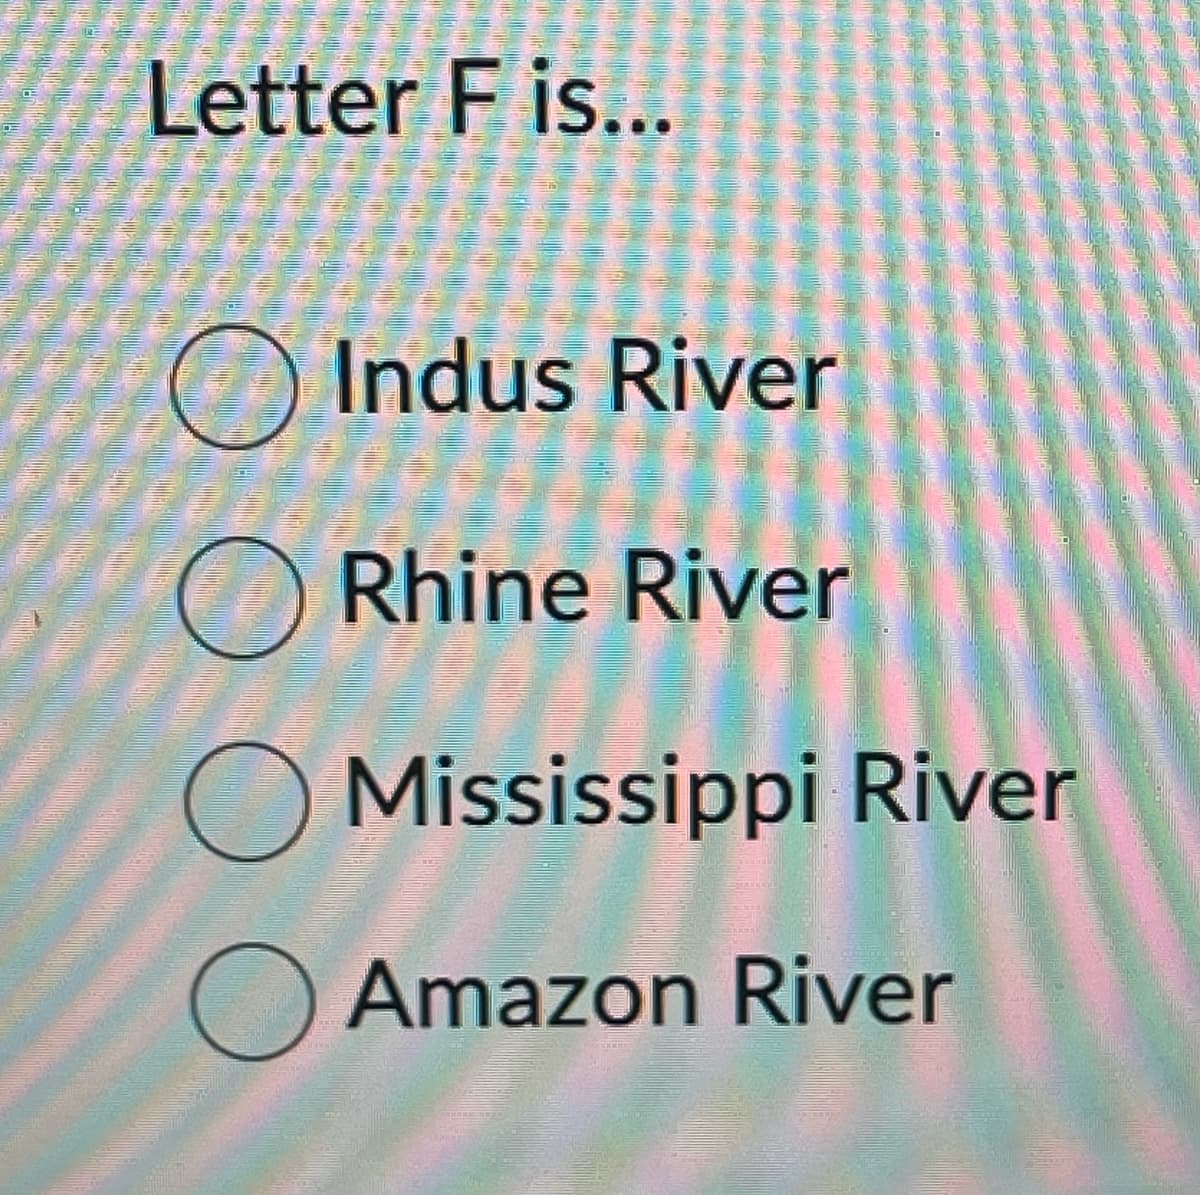 Letter F is...
Indus River
Rhine River
O Mississippi River
Amazon River